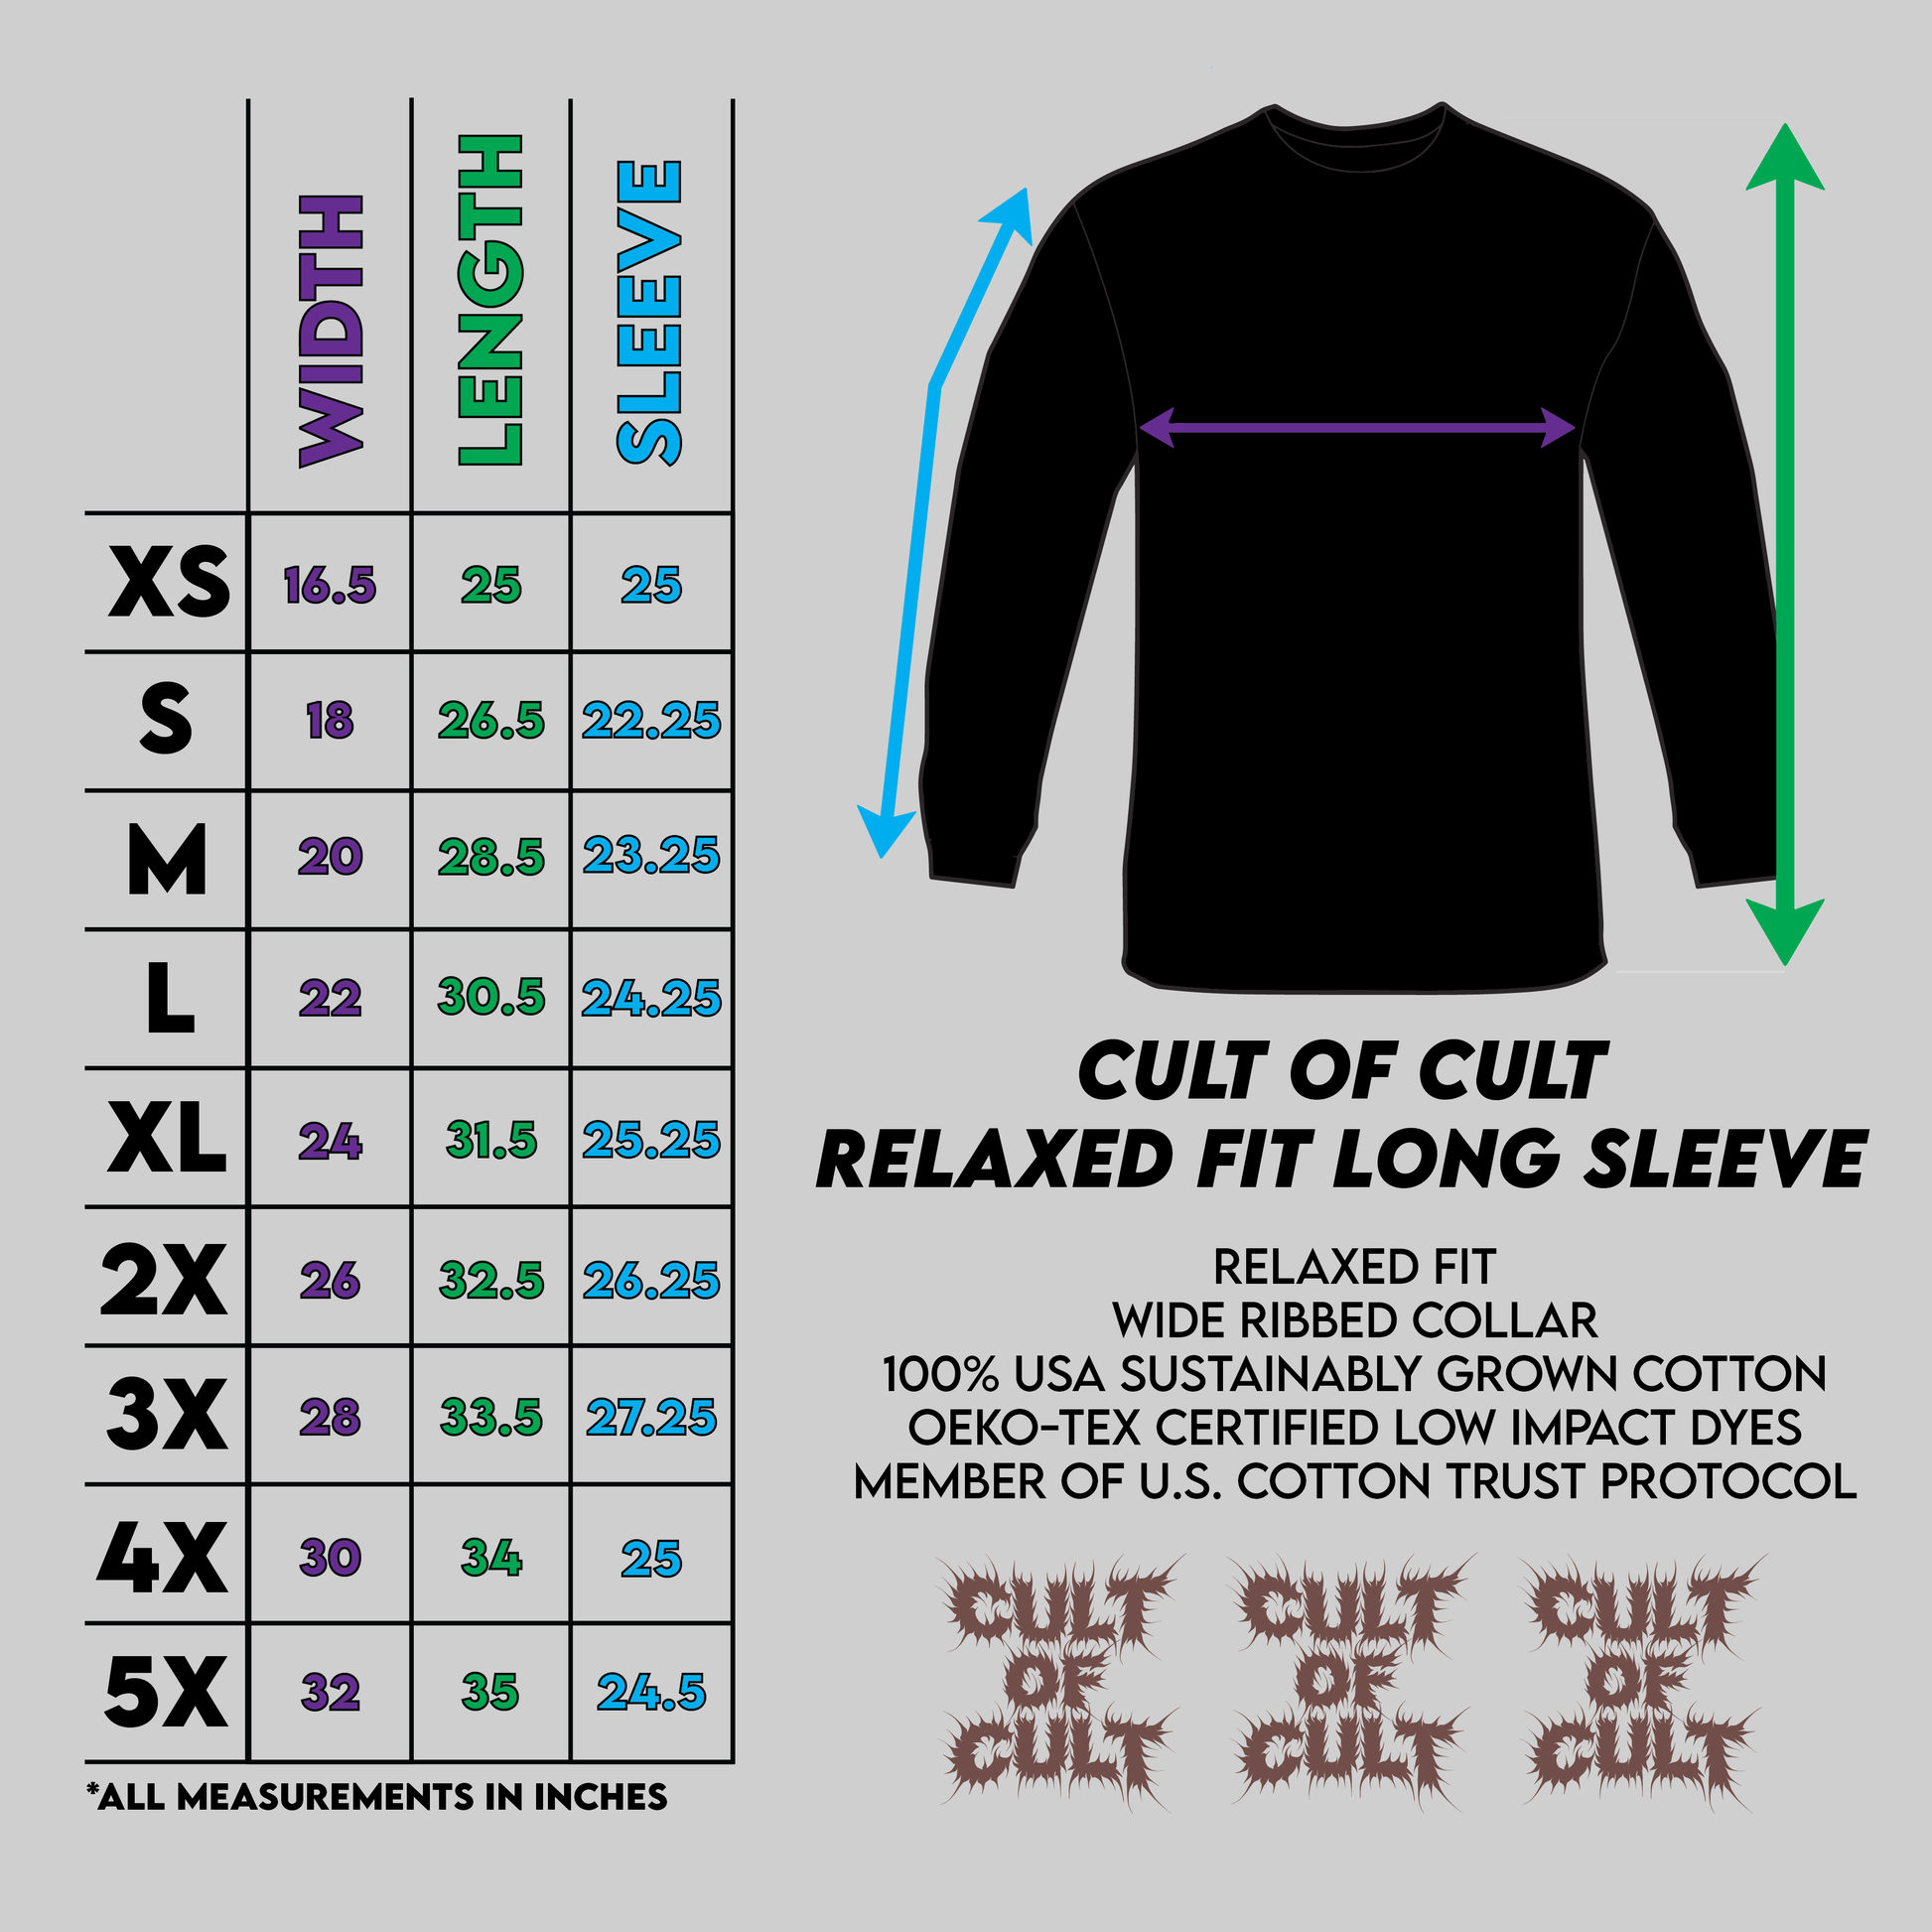 Sizing chart for Cult of Cult long sleeve shirts.